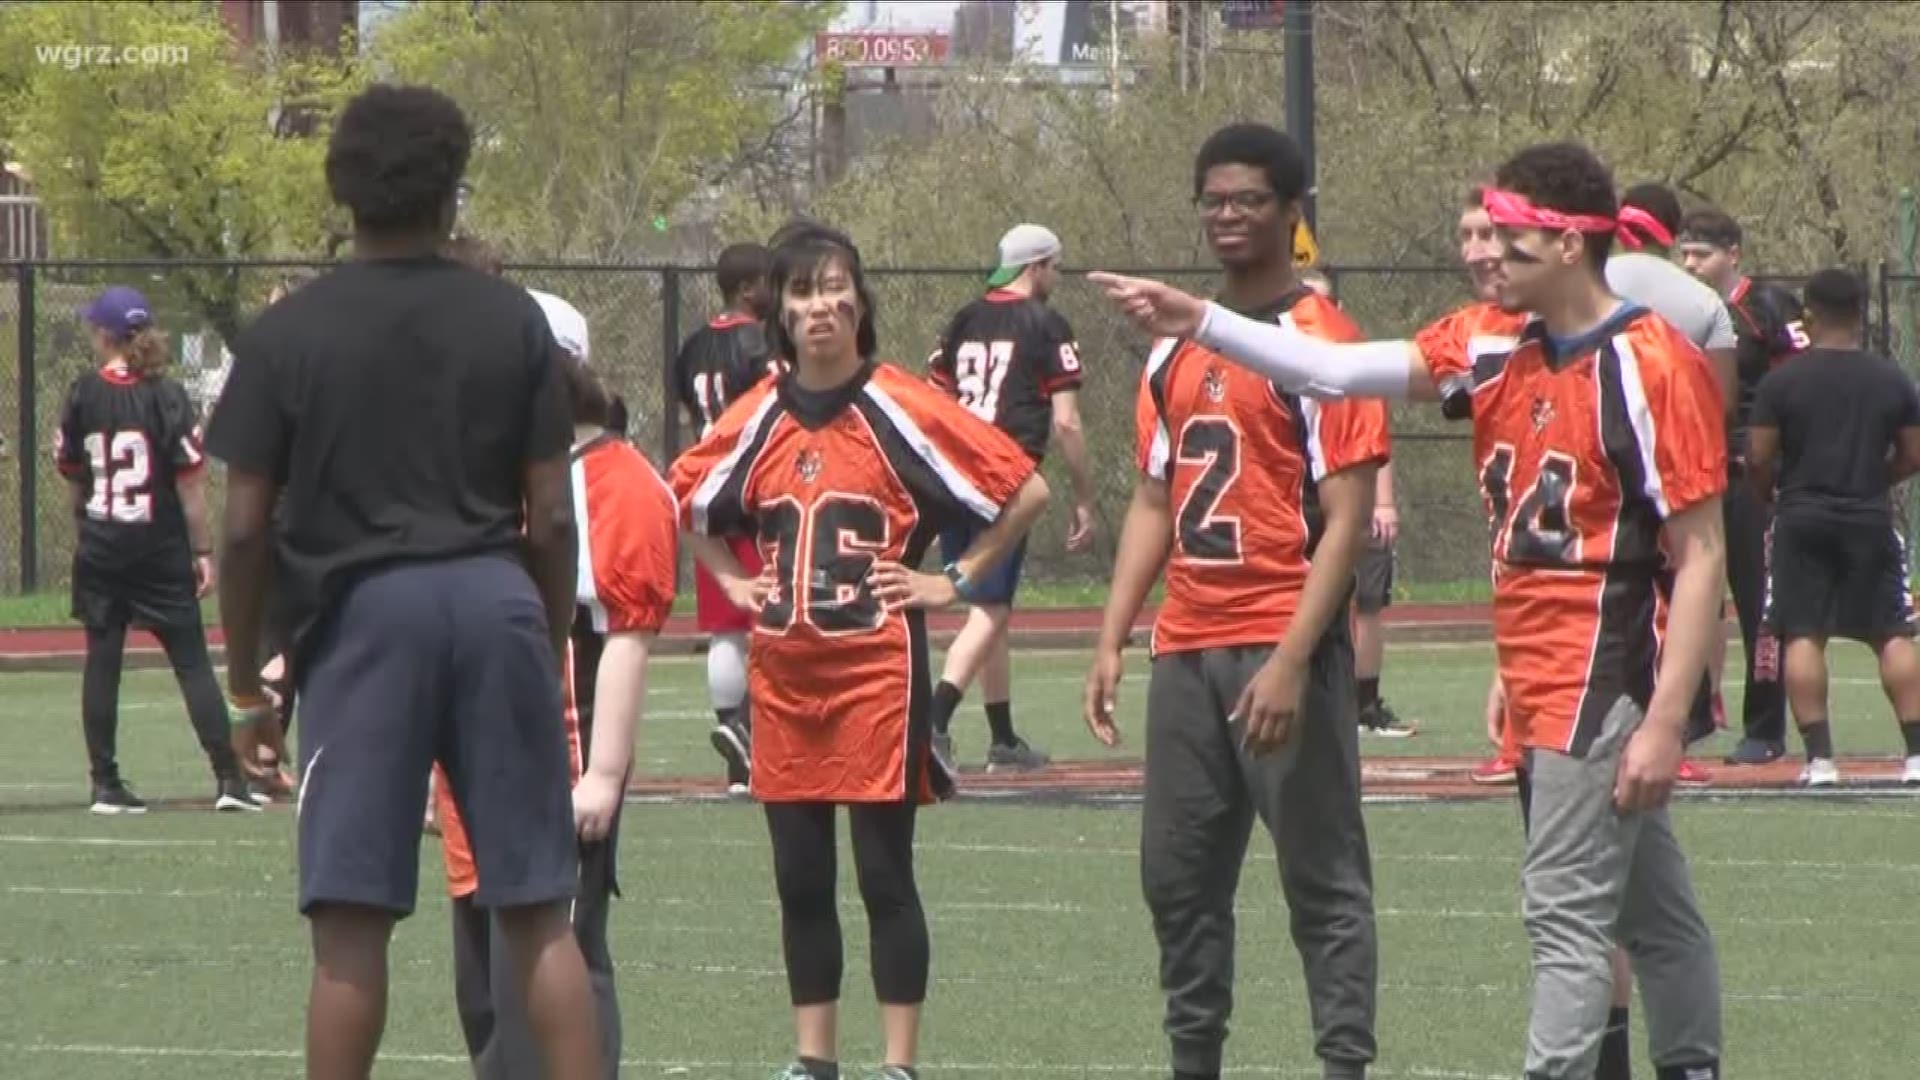 Individuals with disabilities are paired up with Best Buddies chapter members to compete in flag football.